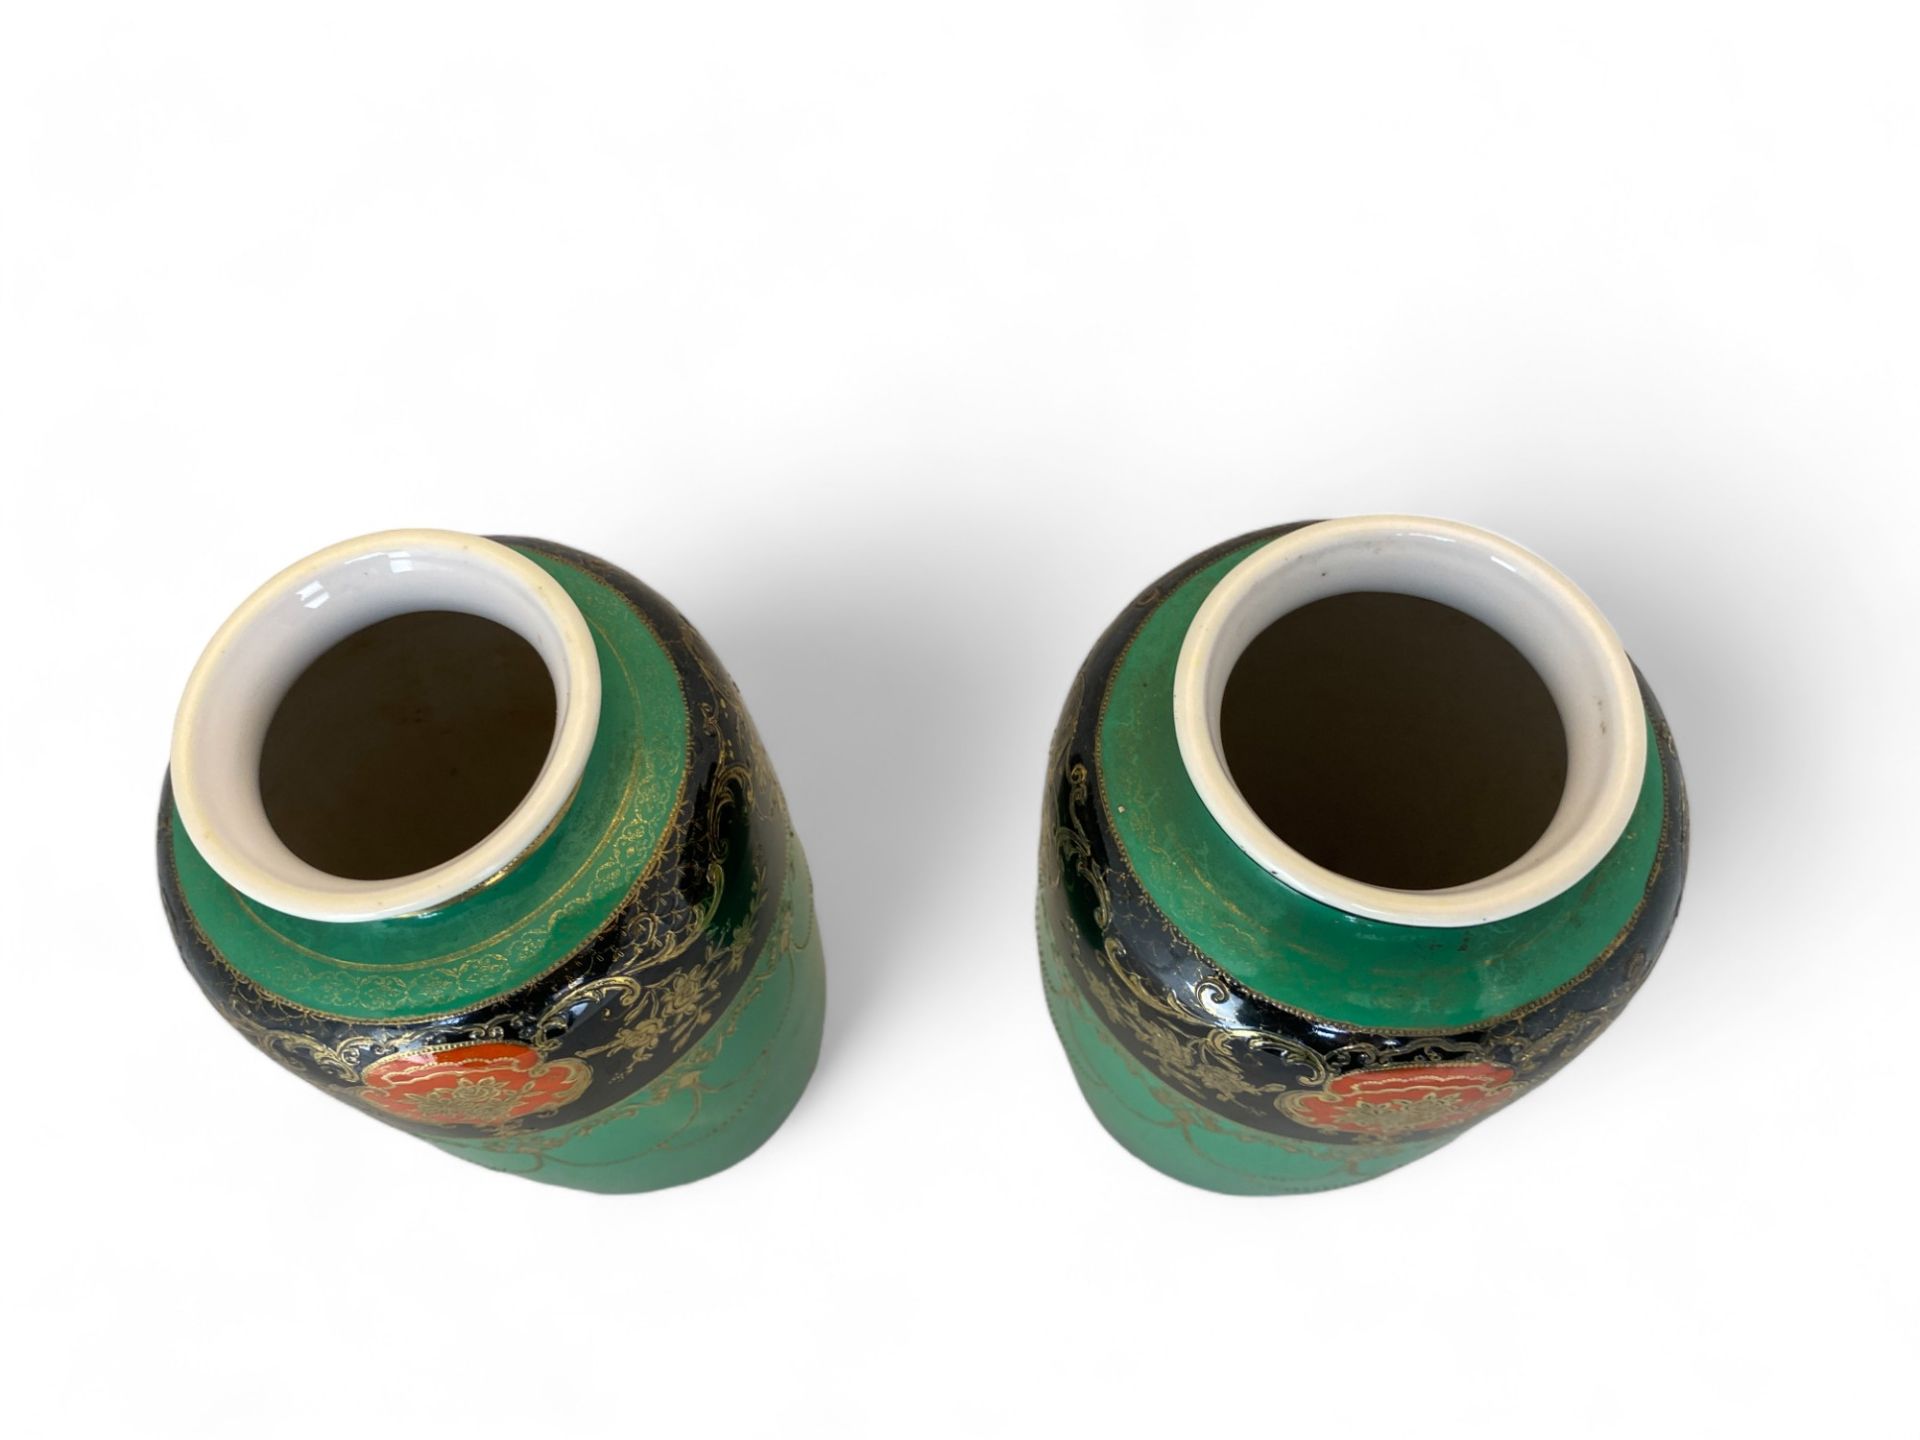 A pair of early 20th century Japanese Noritake vases - Image 3 of 4